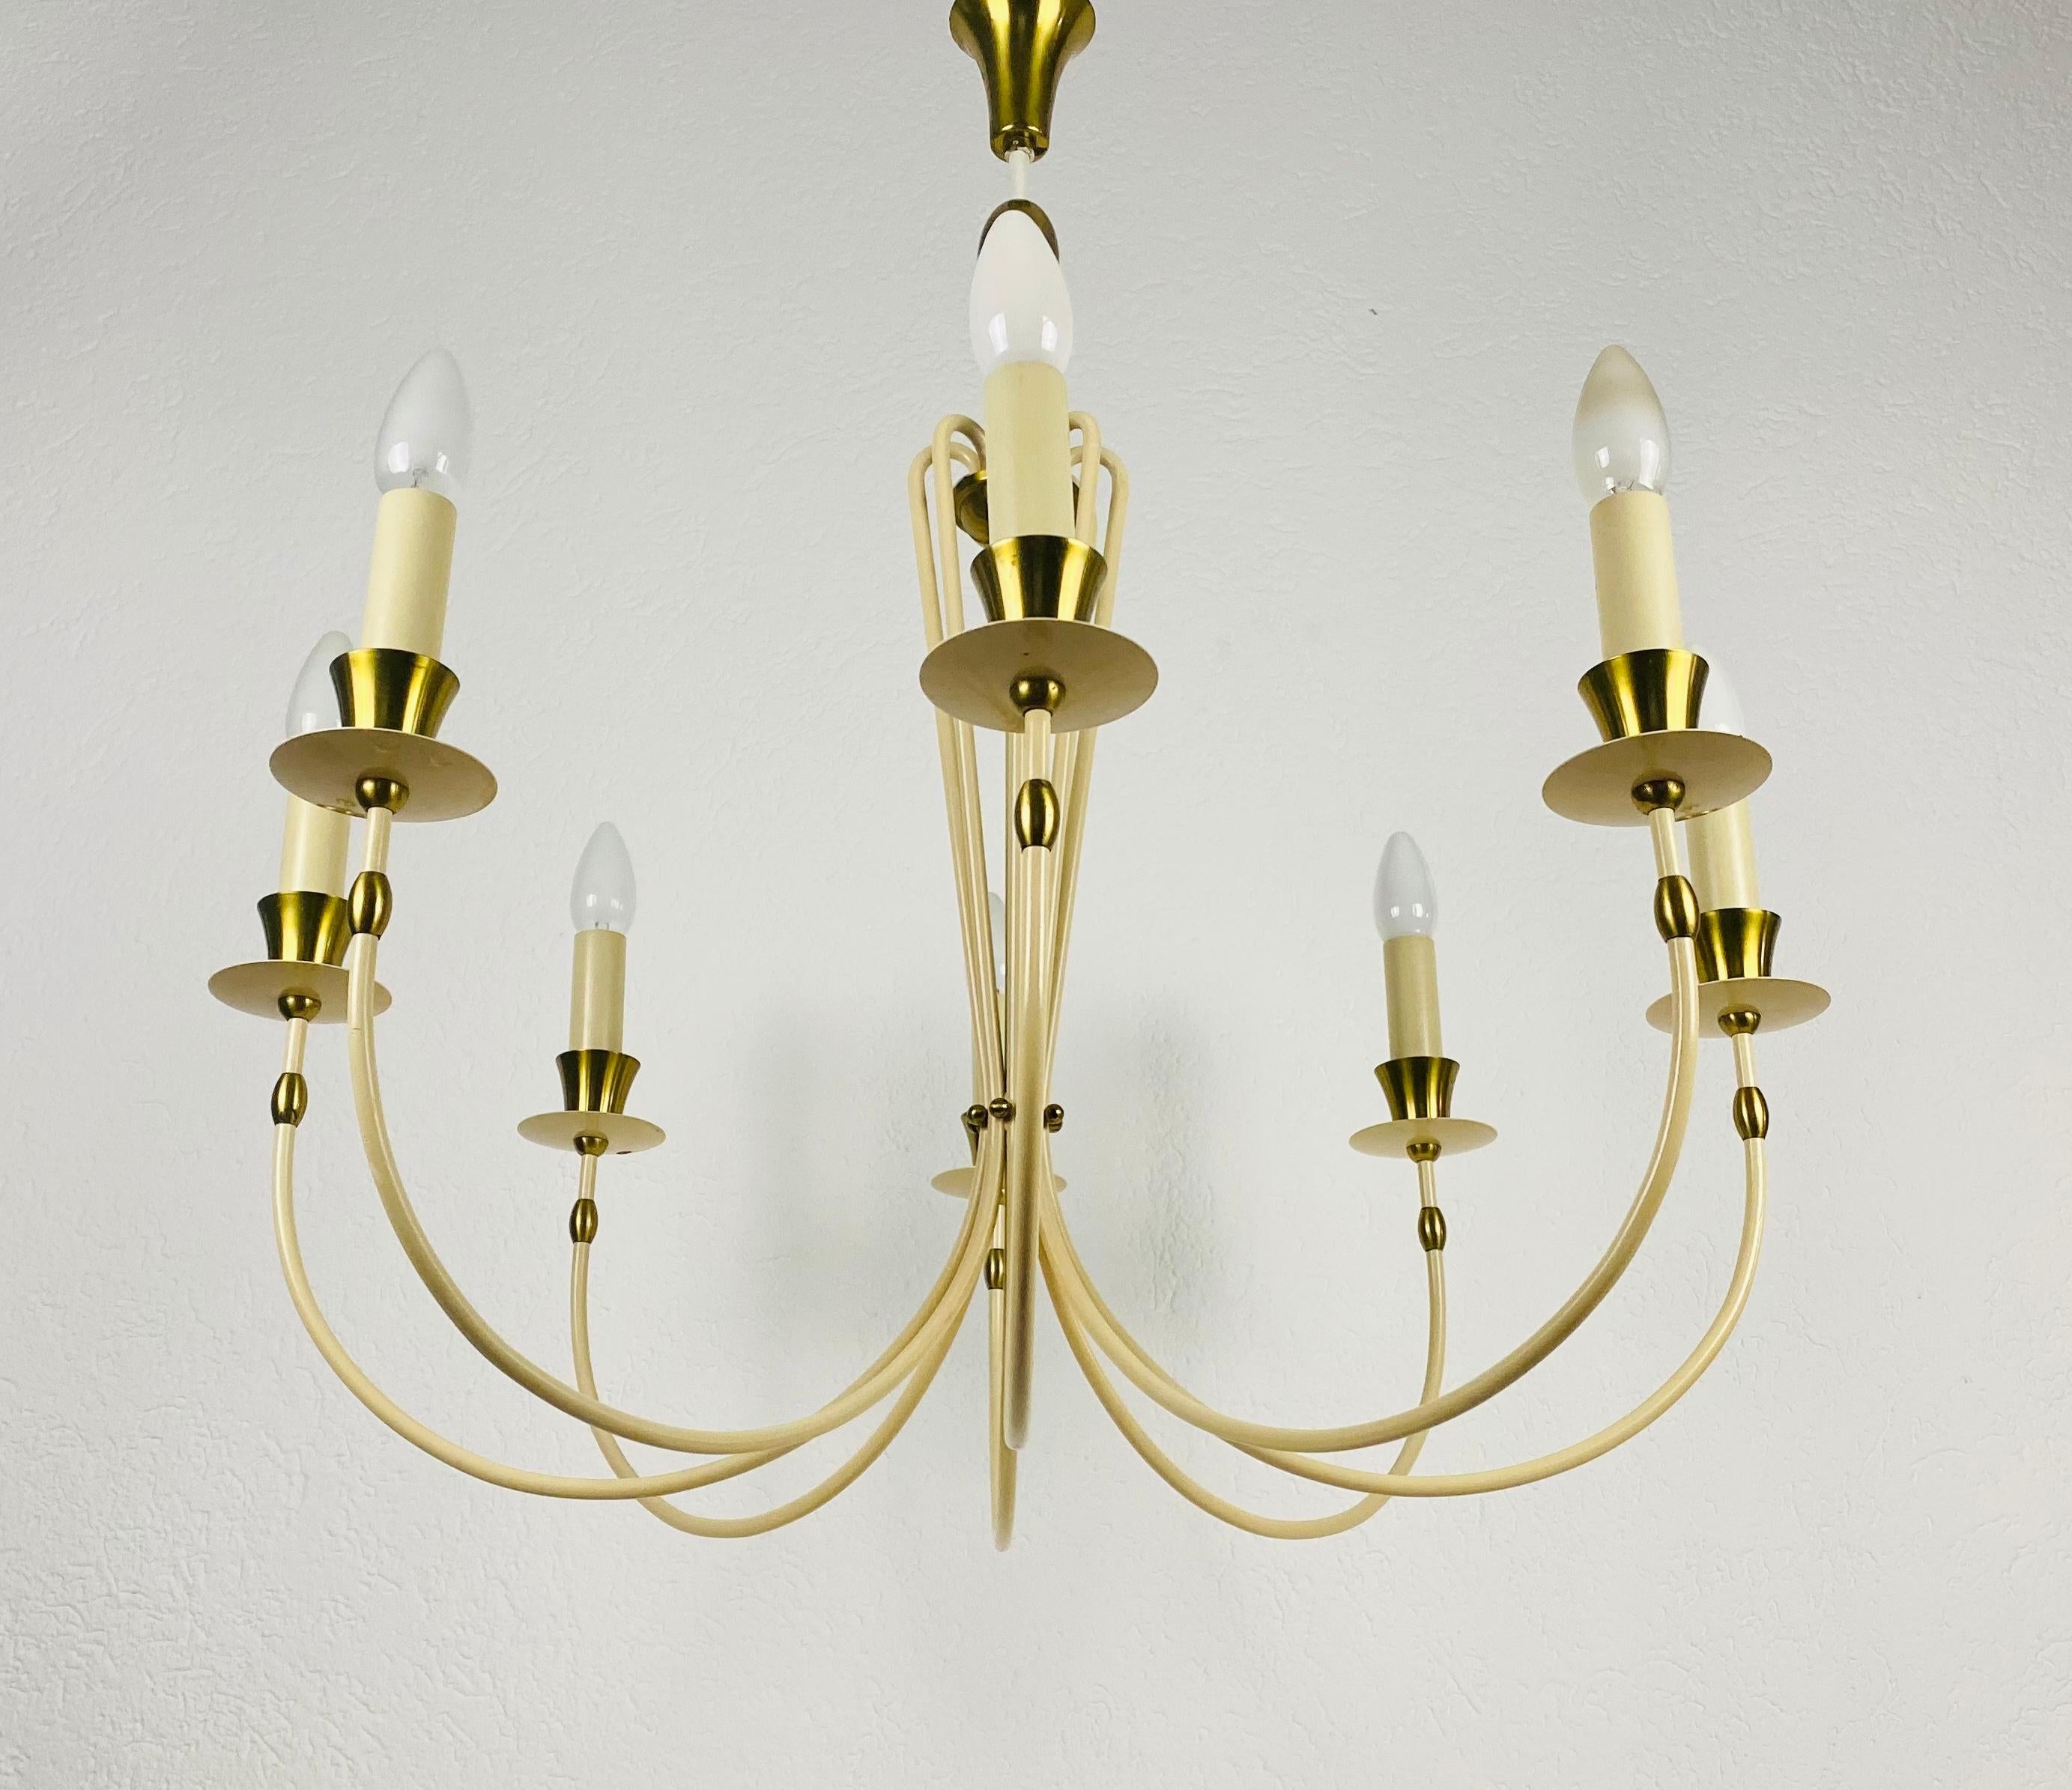 A midcentury chandelier made in Germany in the 1960s. It is fascinating with its rare arms and elegant design.

The light requires eight E14 light bulbs. Works with both 220V/120V. Good vintage condition.

Free worldwide express shipping.